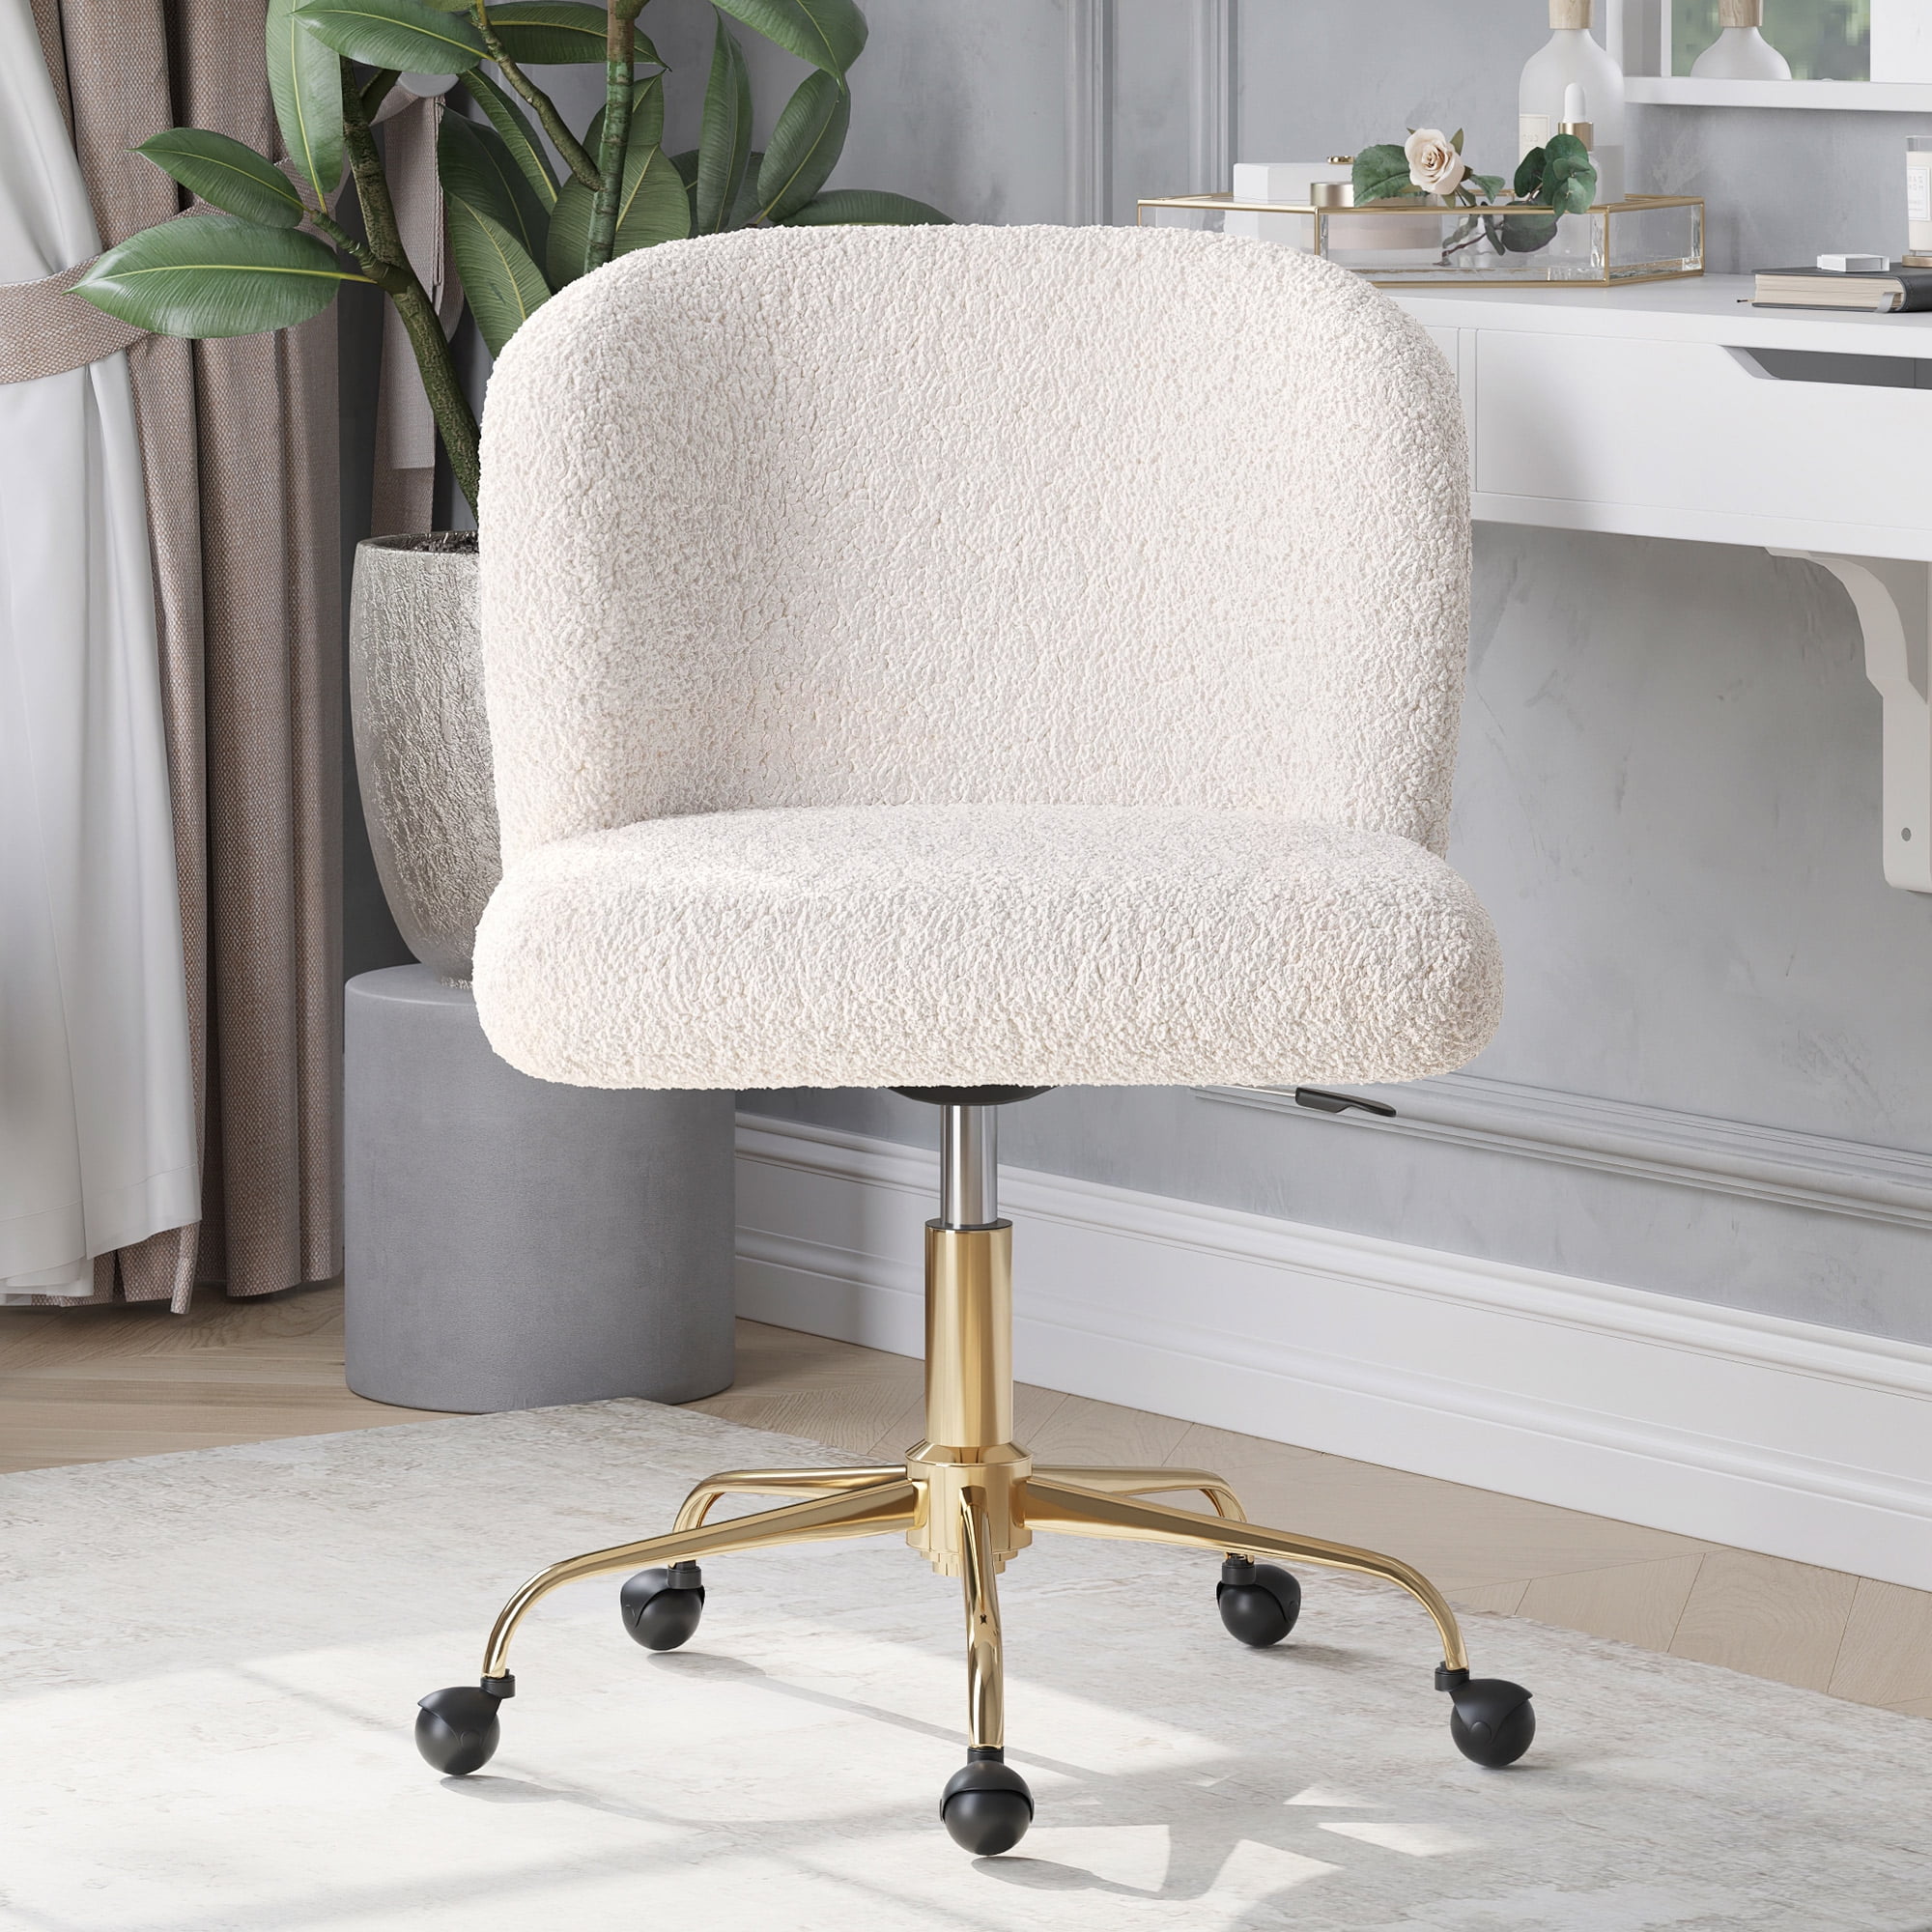 How to Make Office Chair More Comfortable During Pregnancy? – Duhome  Furniture